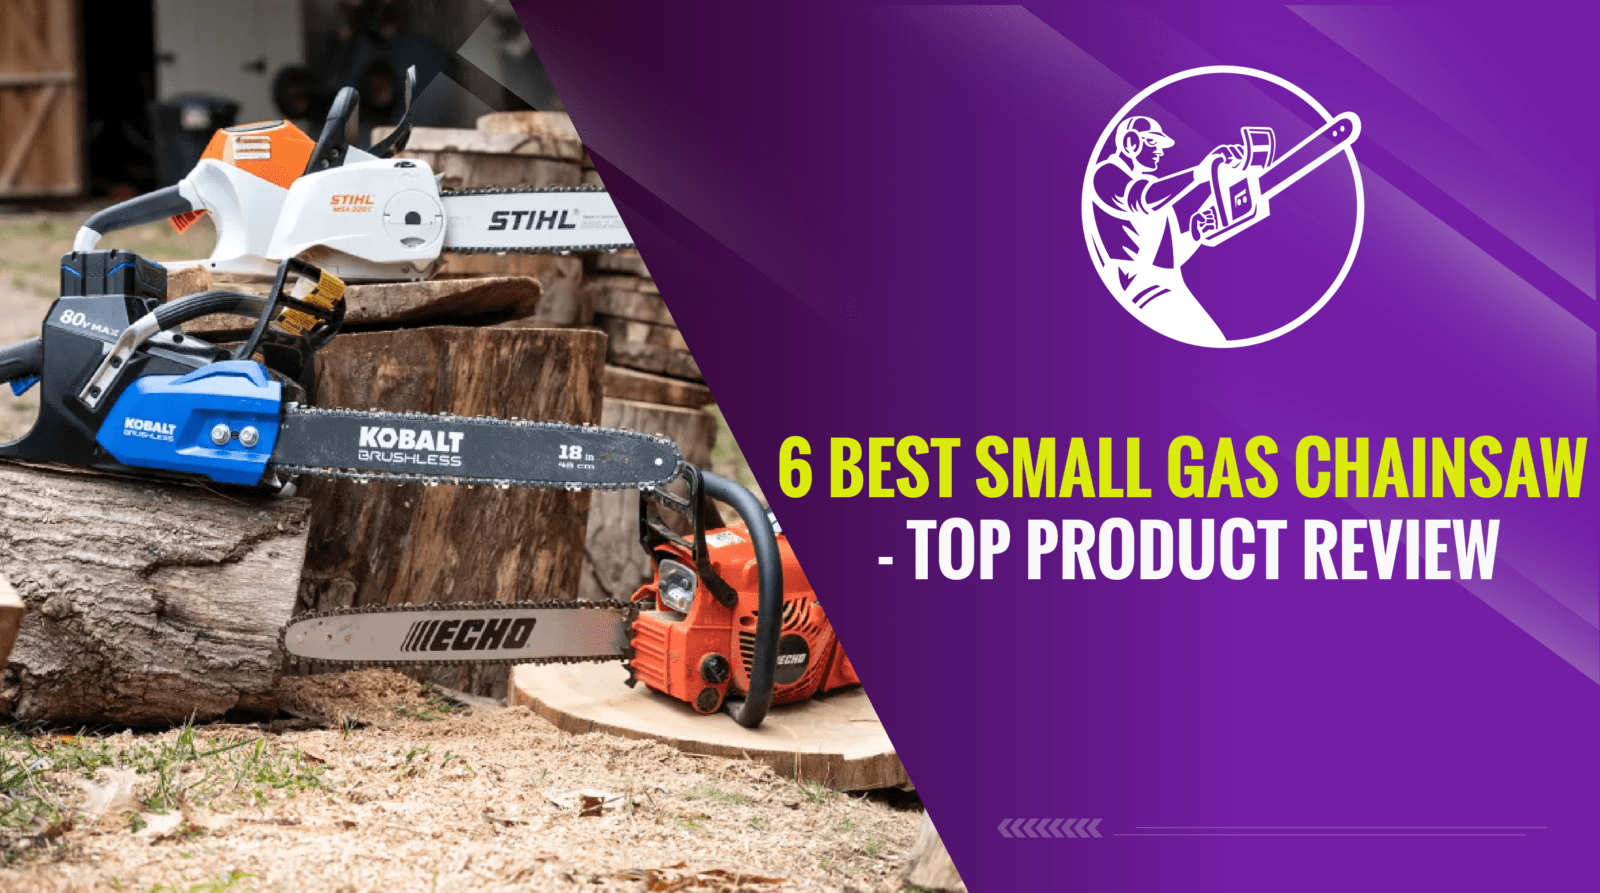 6 Best Small Gas Chainsaw - Top Product Review